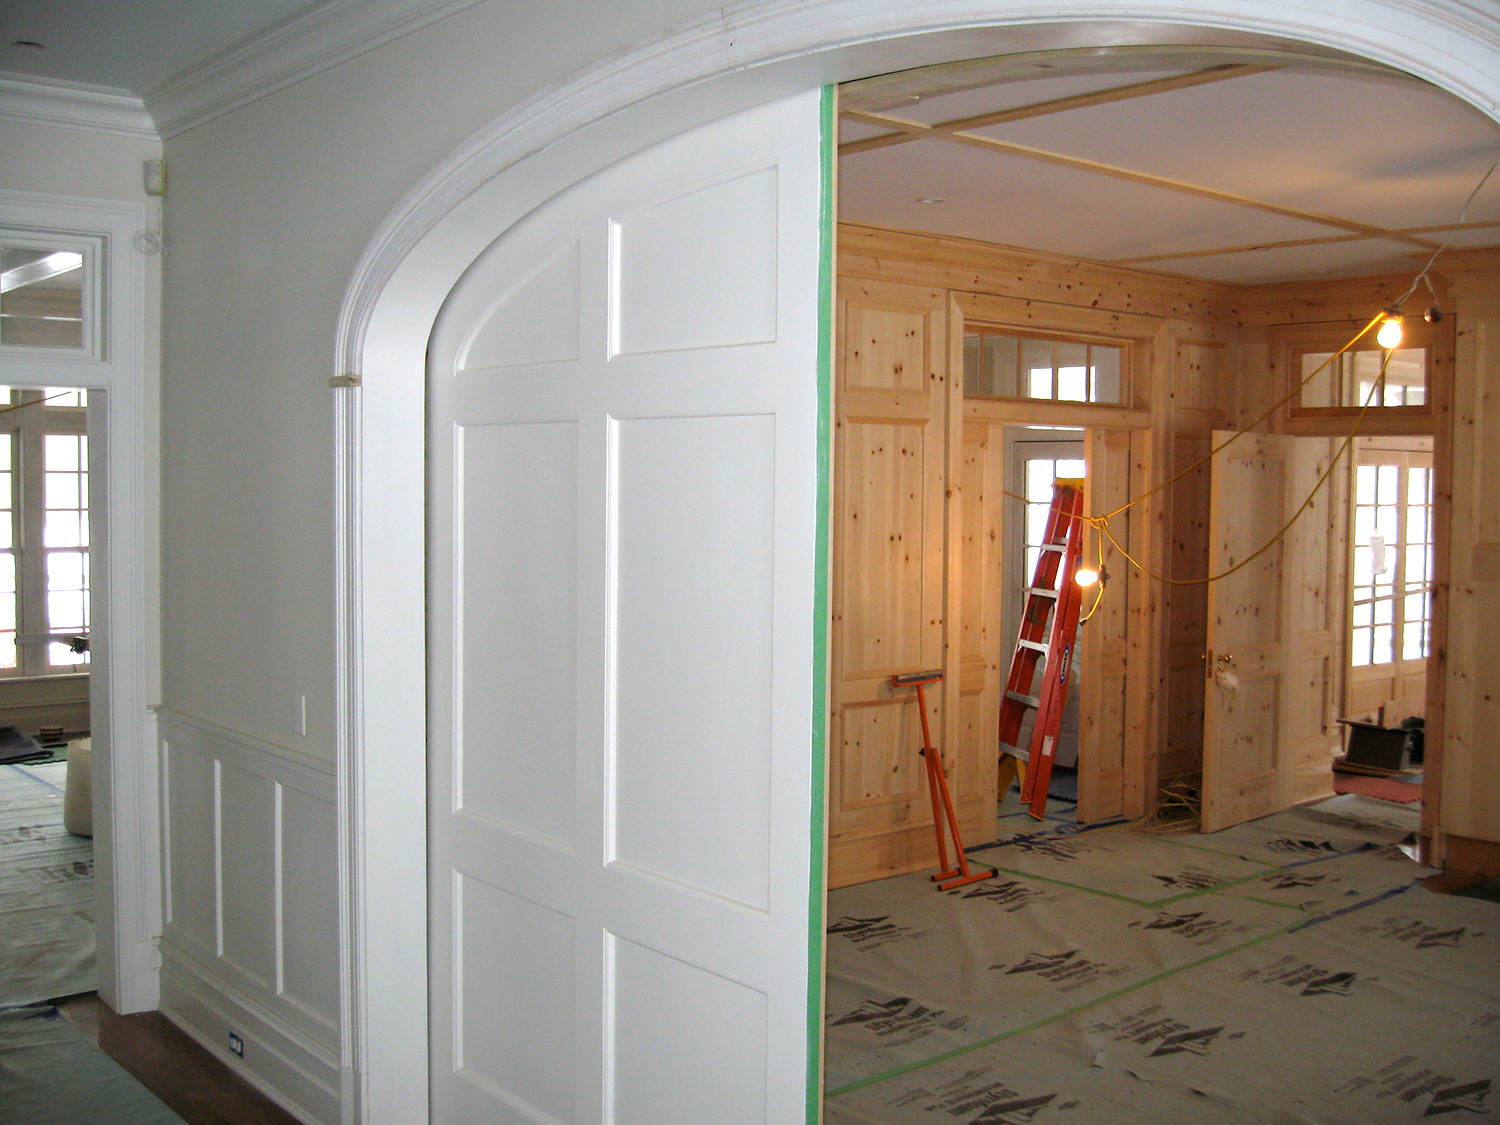 The view looking in to the library. Paint grade panel doors. Hillsdale, NY.